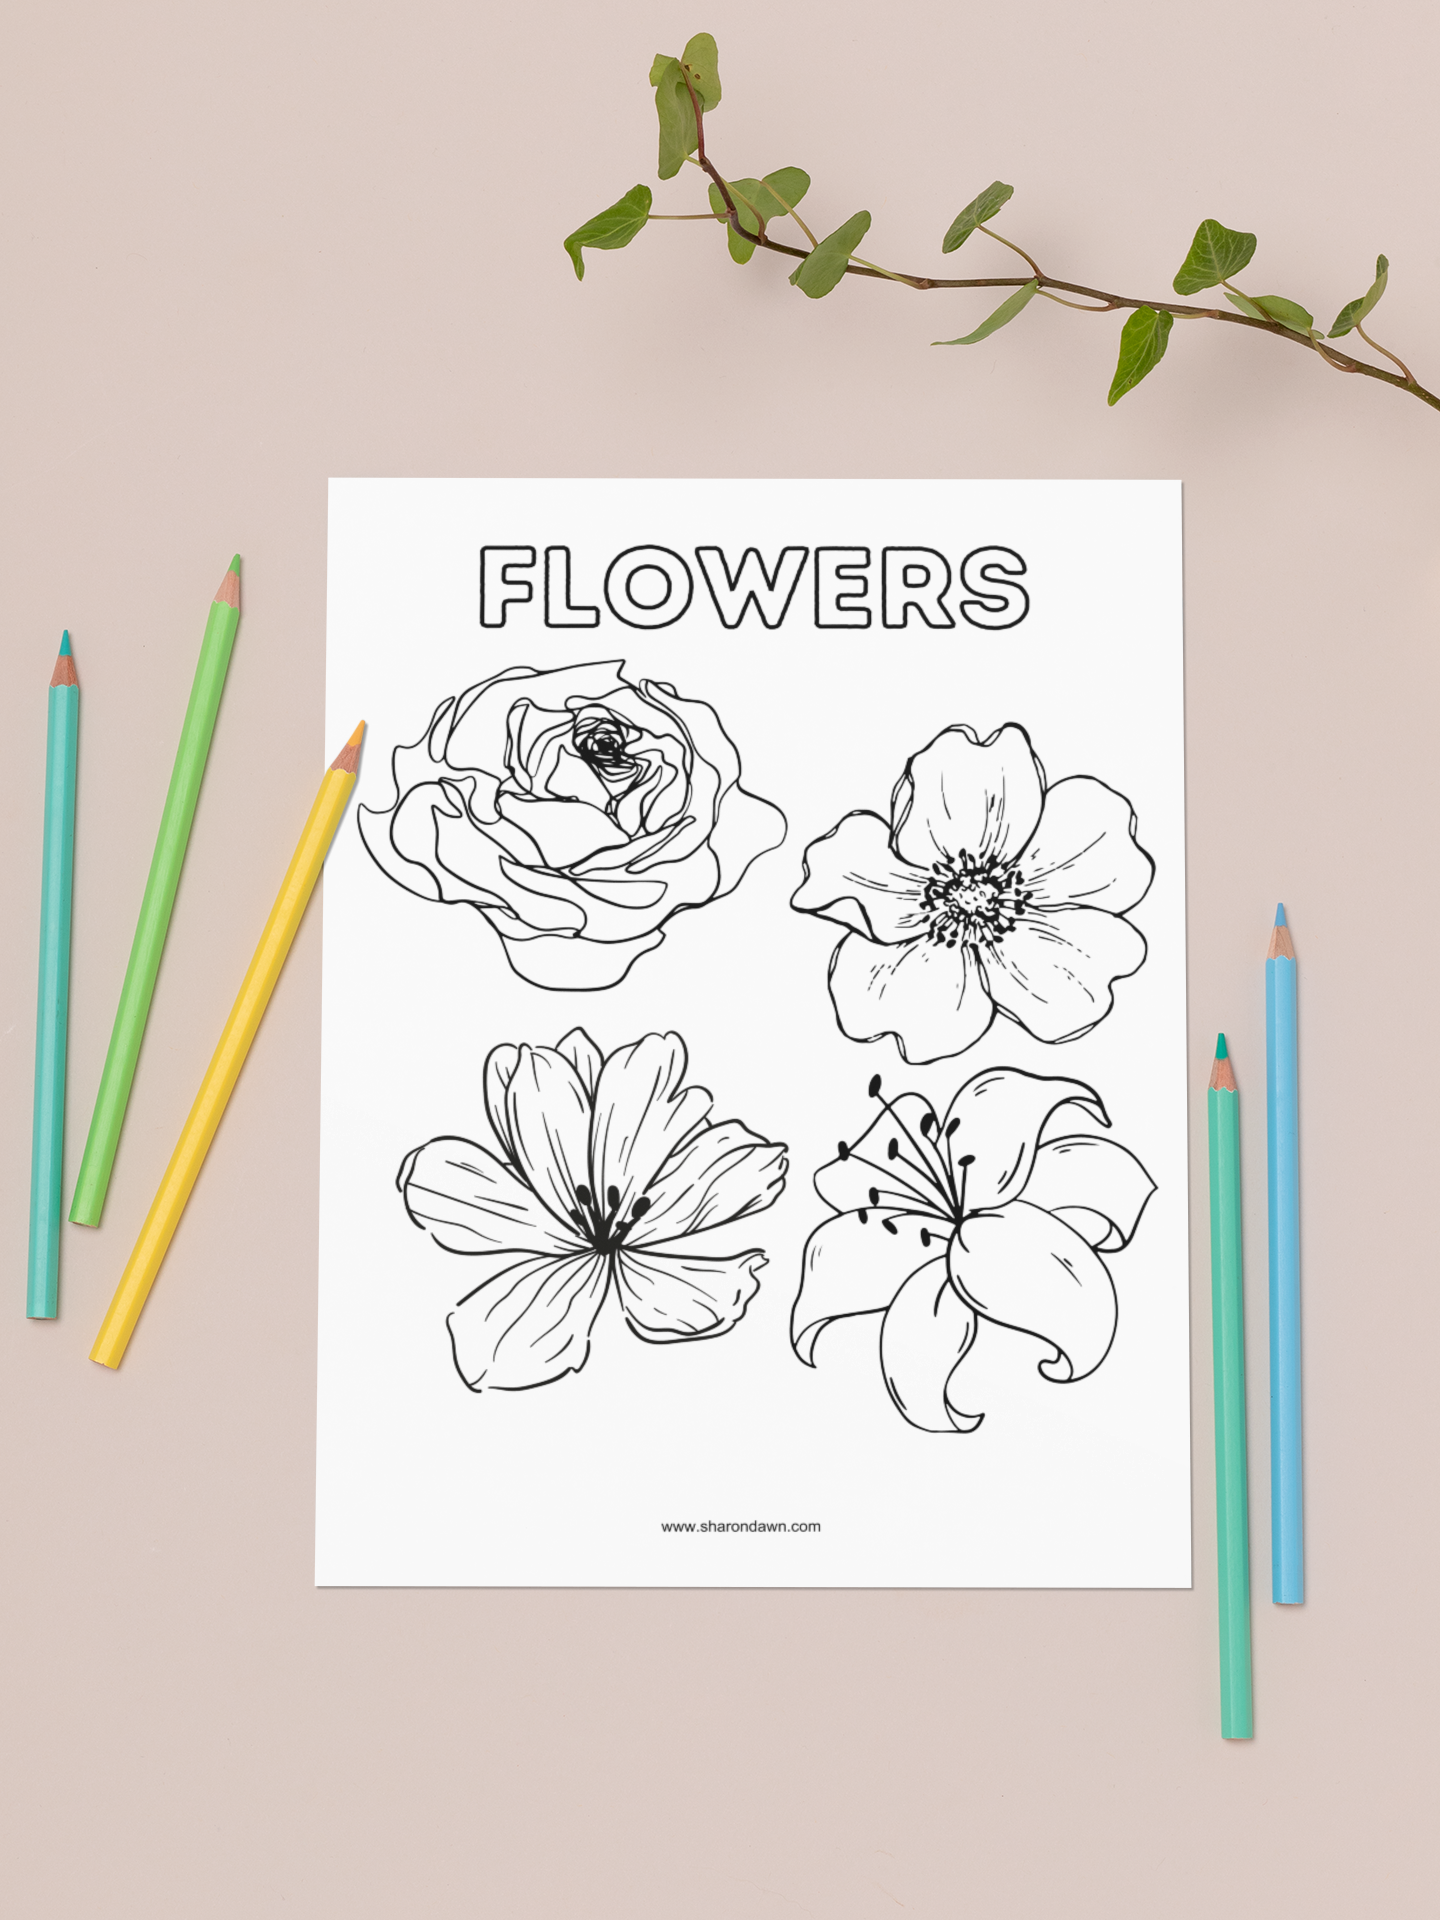 Flowers - Colouring Page - Printable Digital Download ~ Sharon Dawn Collection